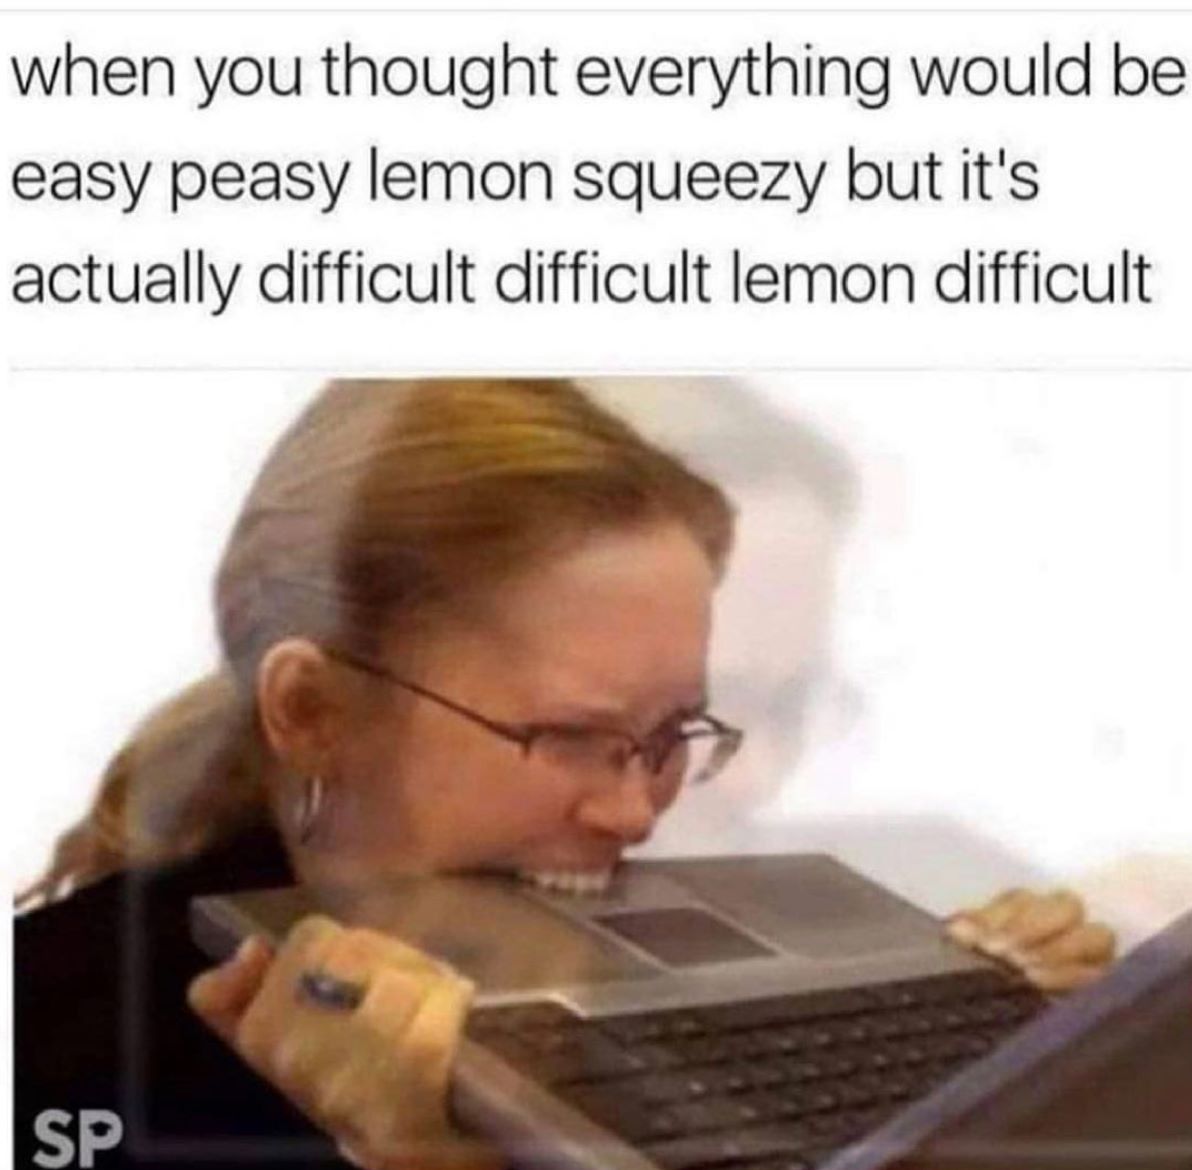 self deprecating memes - when you thought everything would be easy peasy lemon squeezy but it's actually difficult difficult lemon difficult Sp